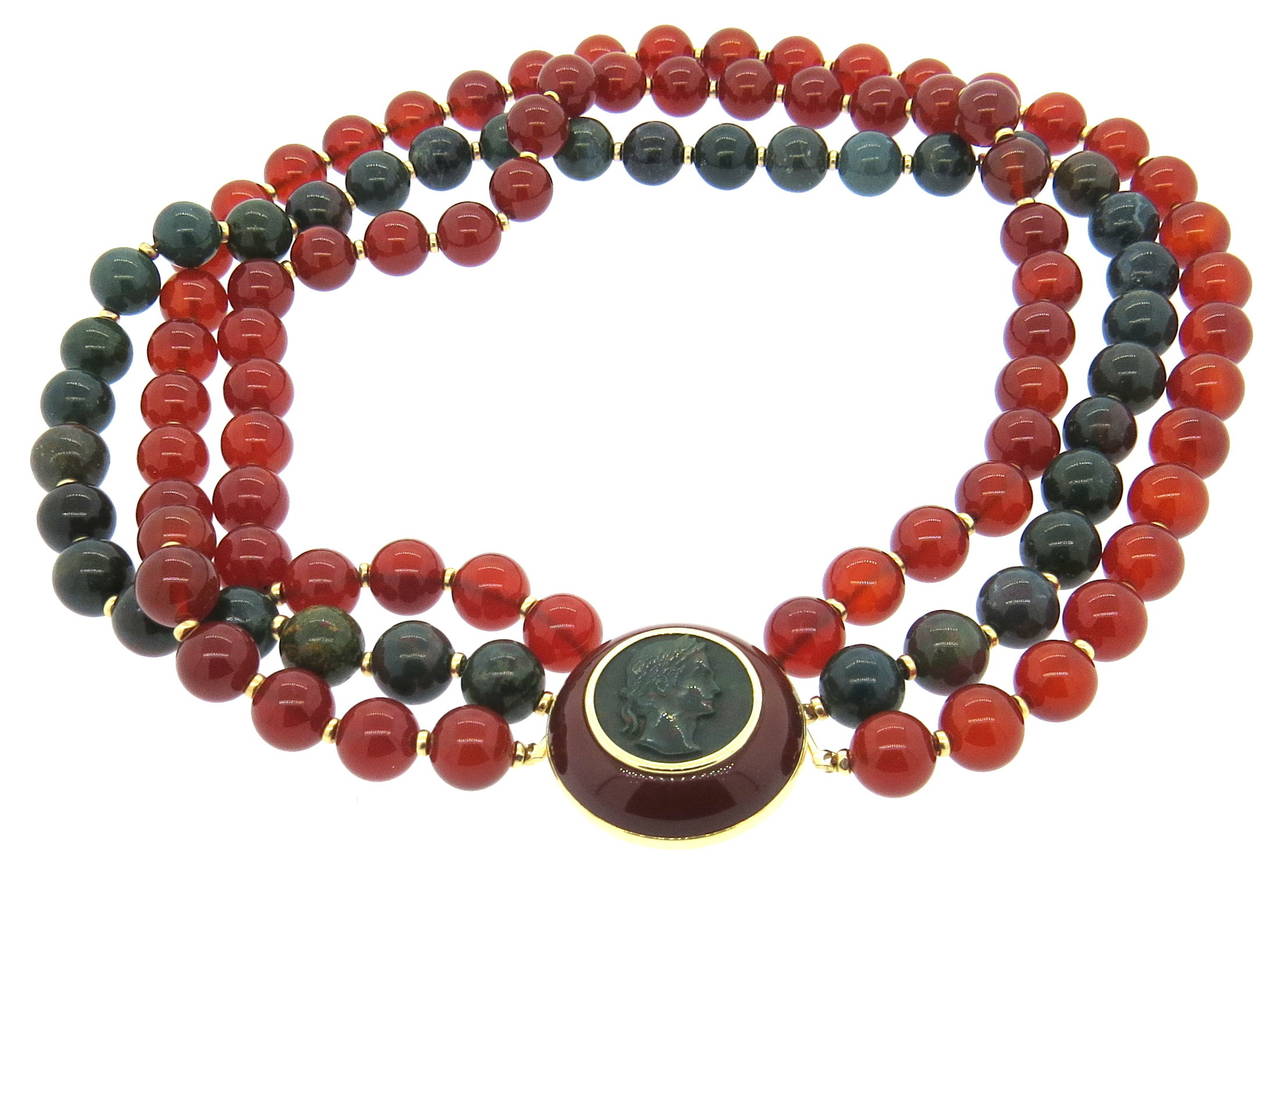 Trianon multi strand necklace, featuring 10mm carnelian and bloodstone beads, enhanced with 30mm 14k gold clasp, featuring bloodstone intaglio and carnelian (clasp can be detached and worn a s a brooch). Necklace is 16